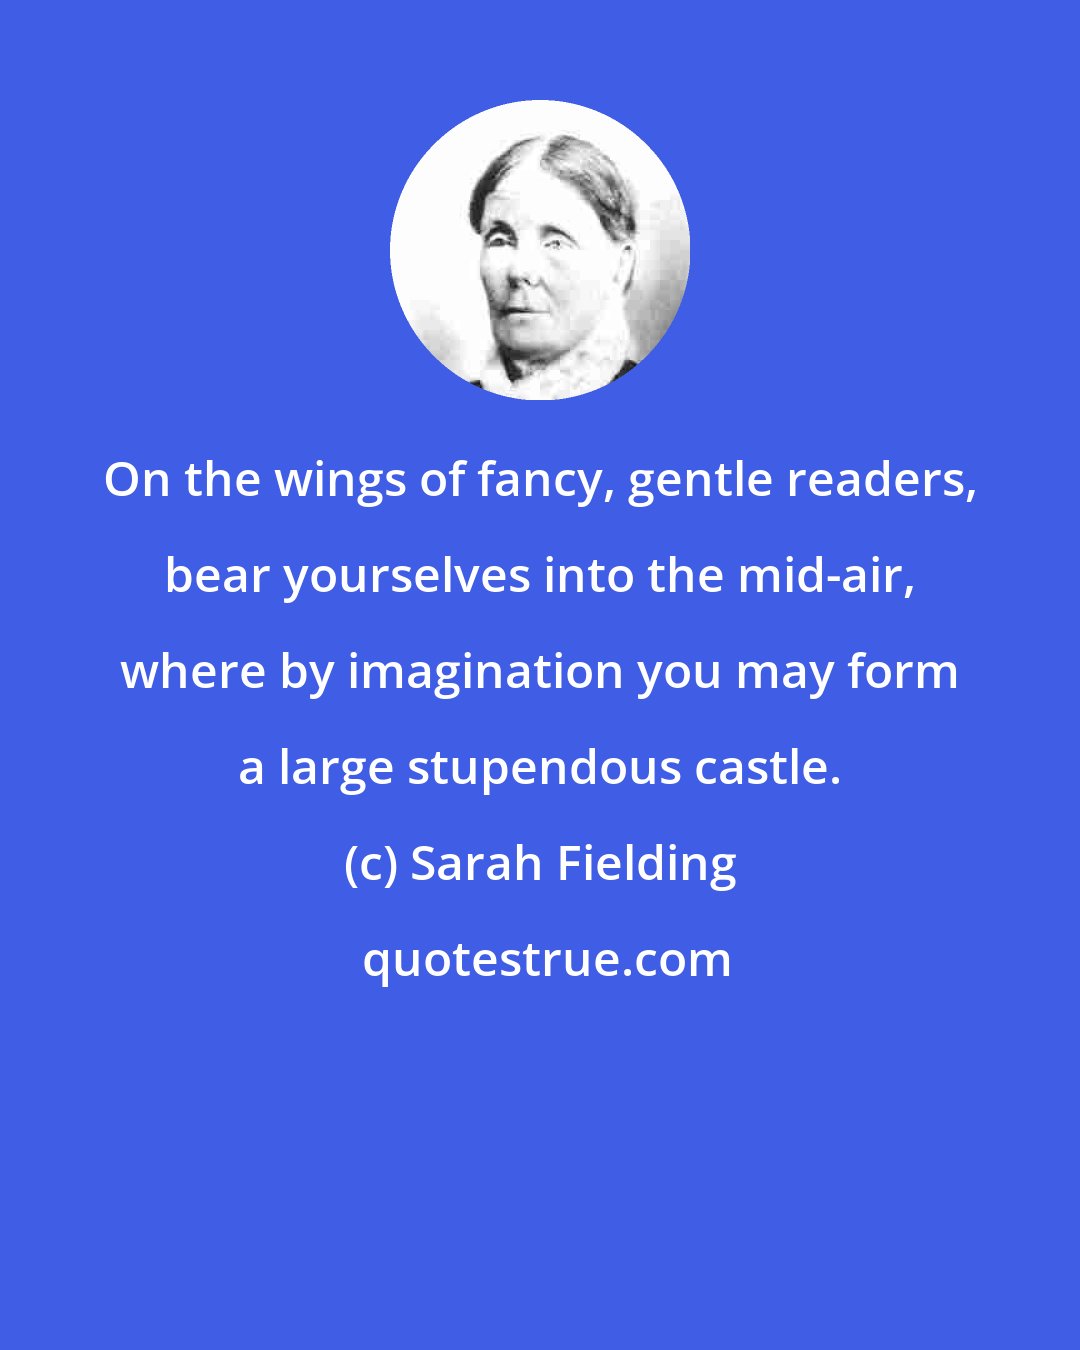 Sarah Fielding: On the wings of fancy, gentle readers, bear yourselves into the mid-air, where by imagination you may form a large stupendous castle.